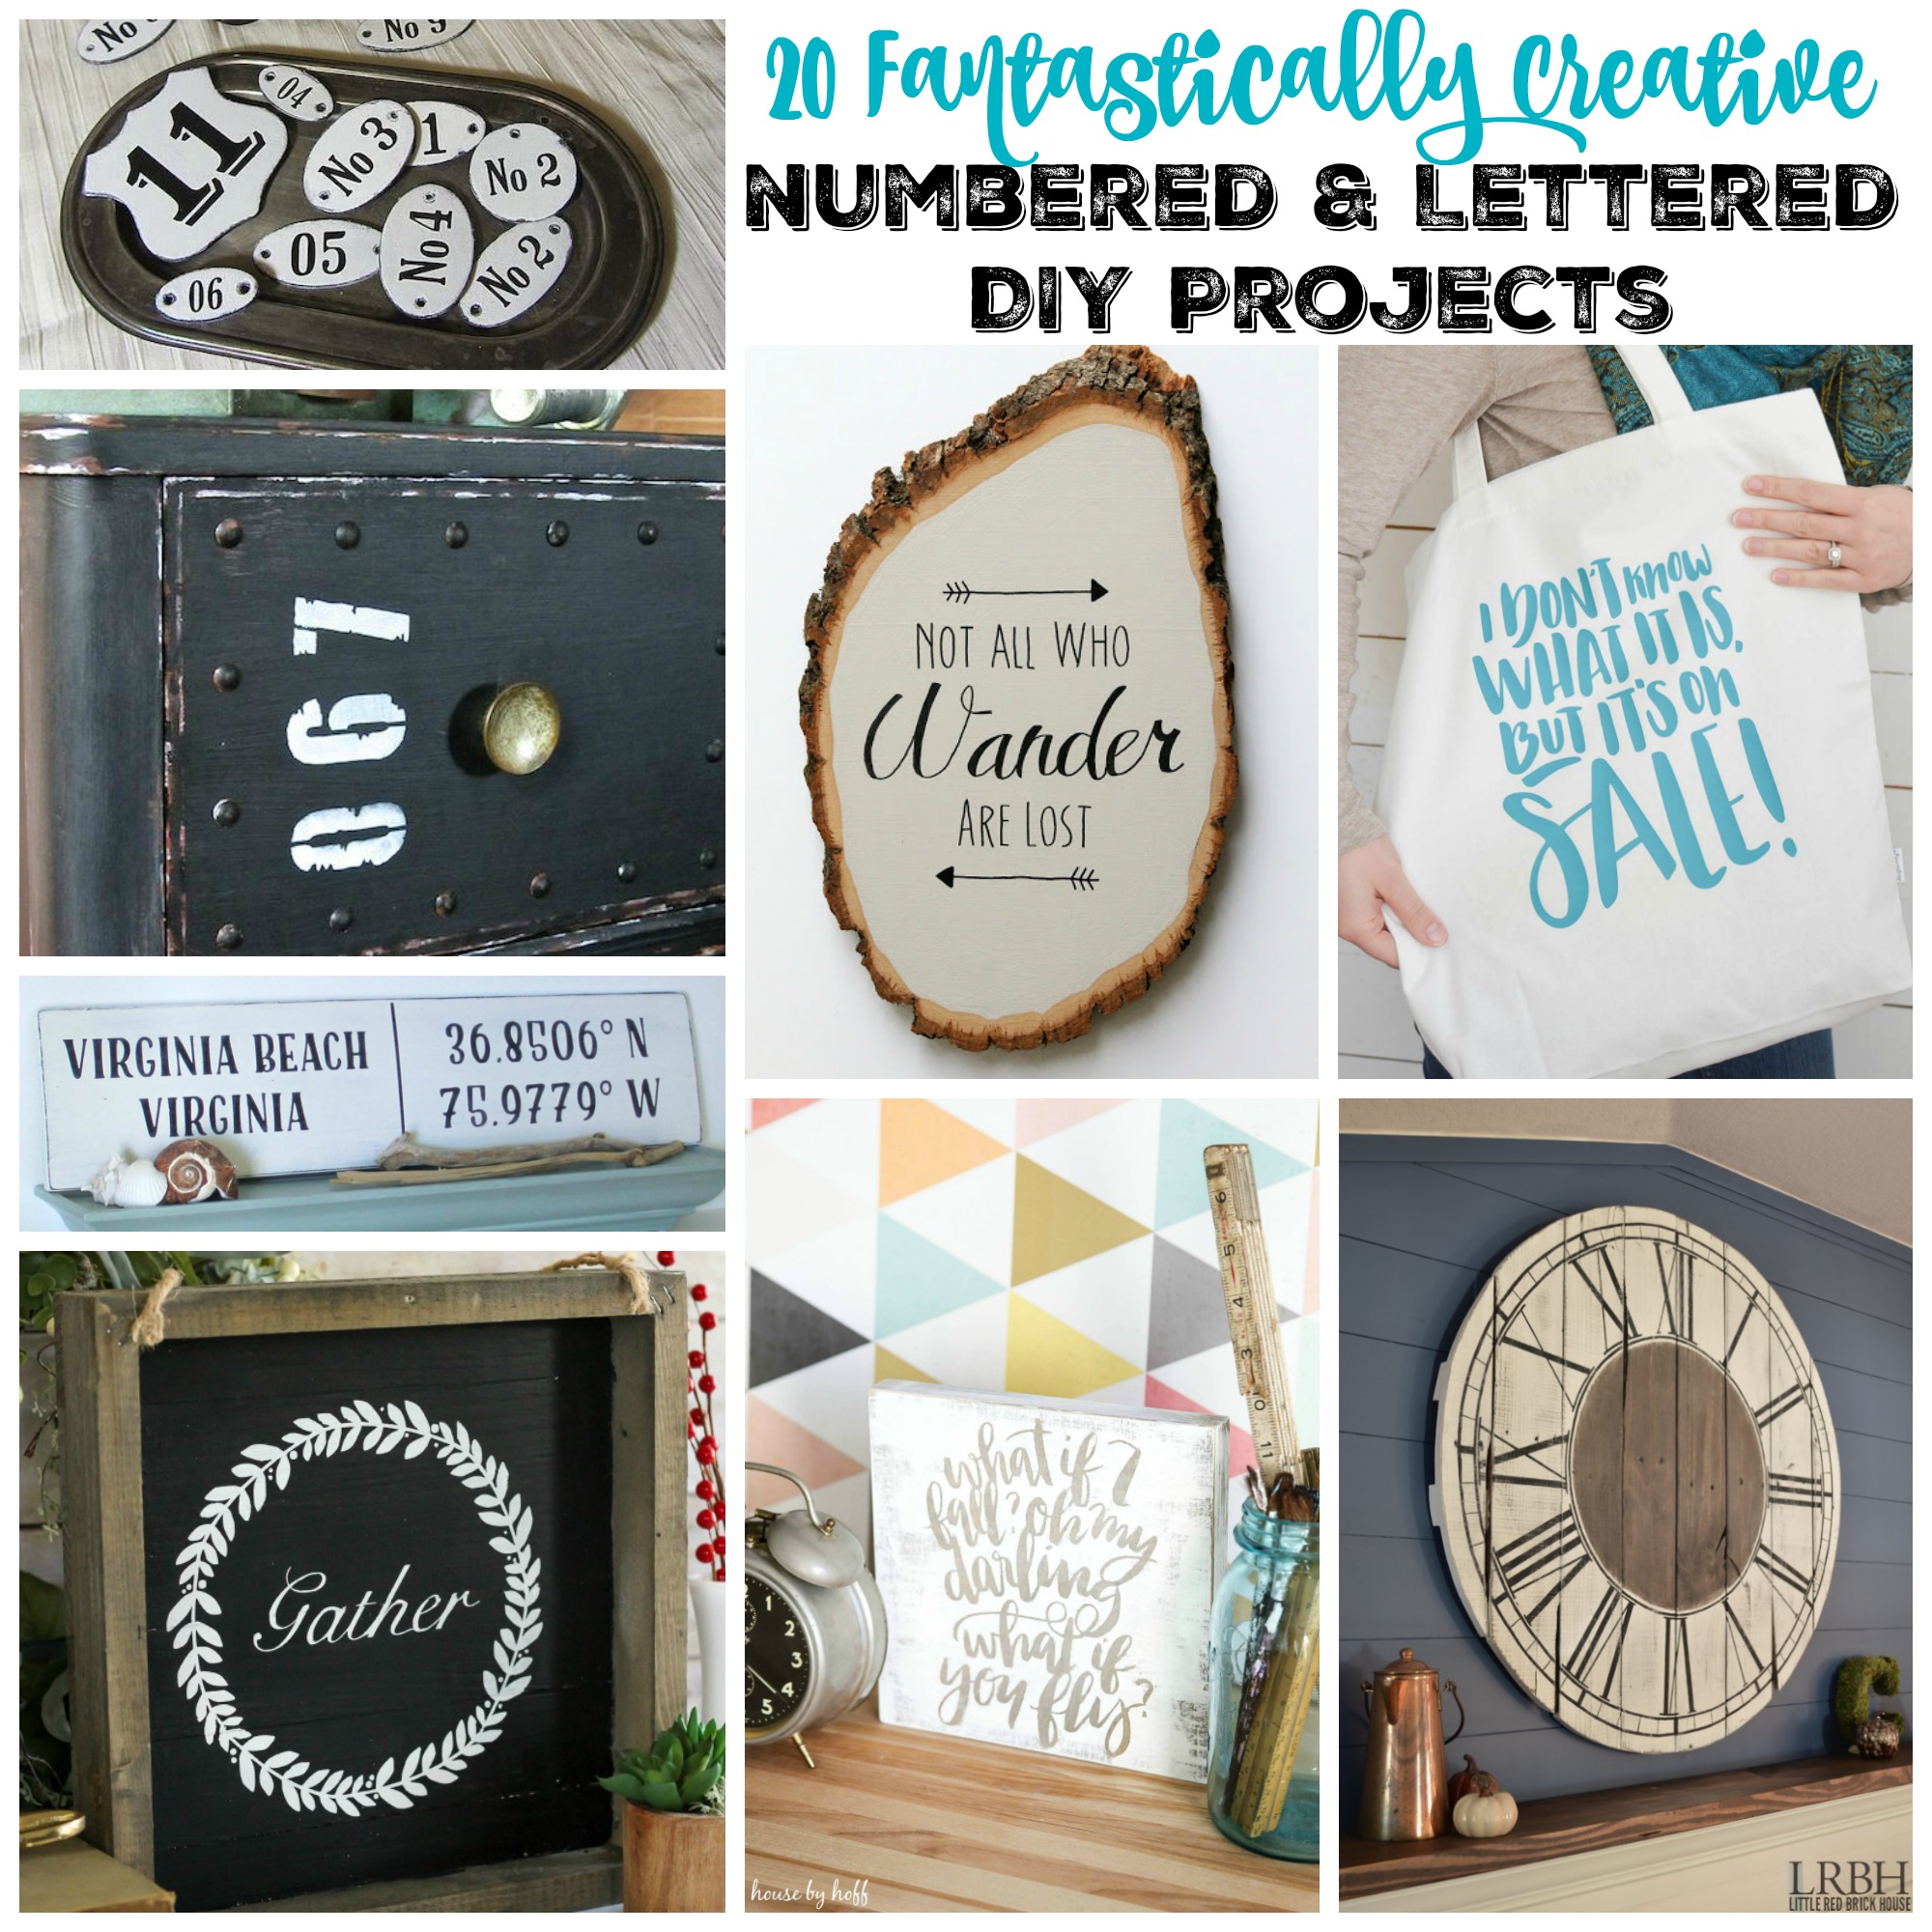 20 Fantastically Creative Numbered and Lettered DIY Projects